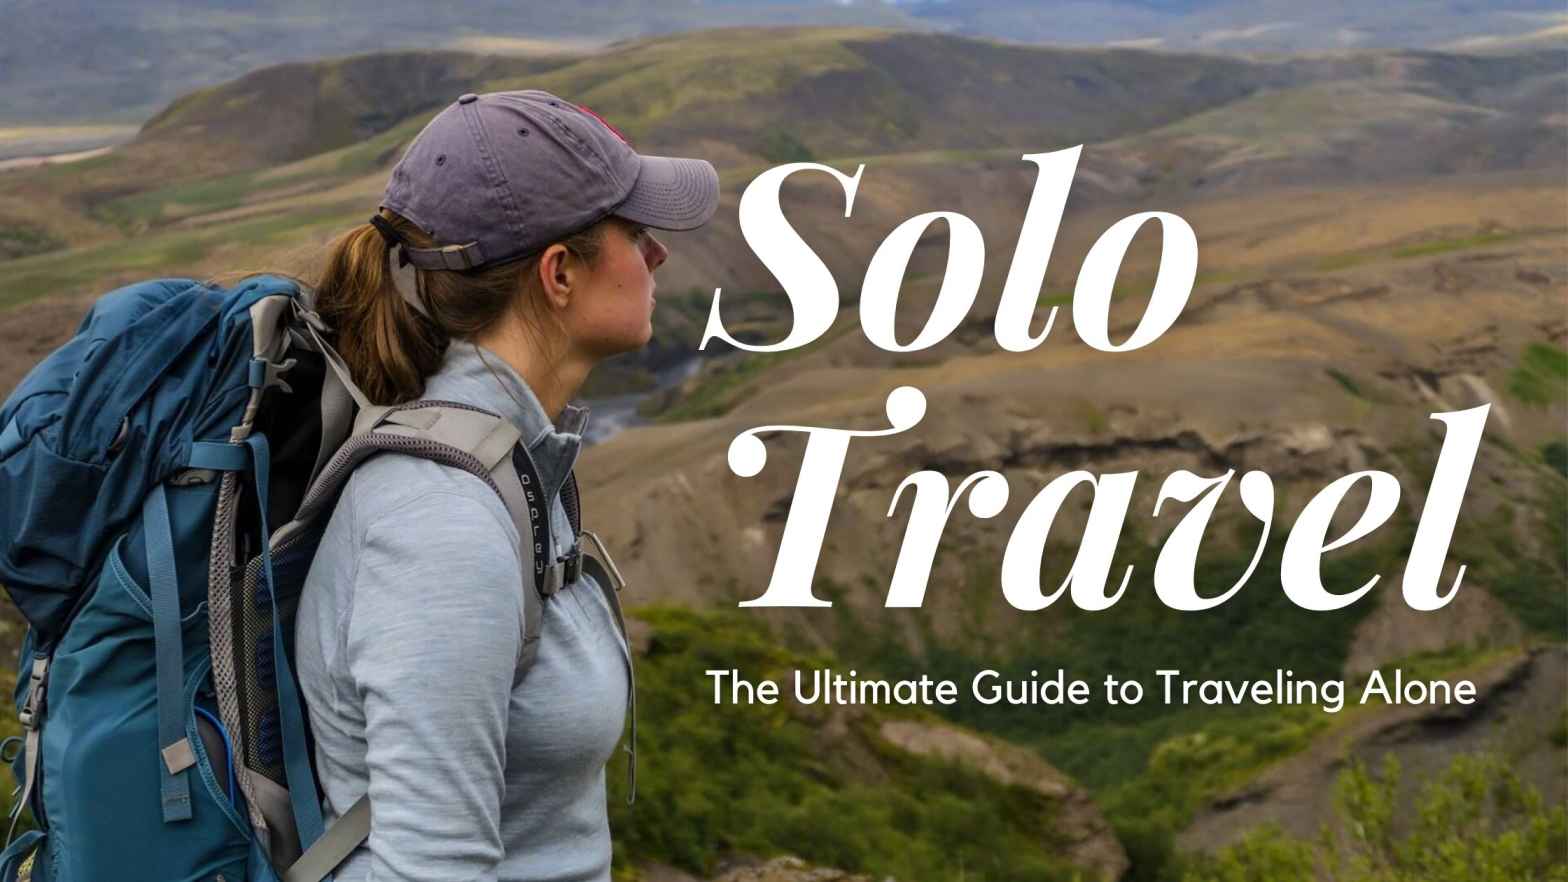 Solo travel tips safety advice: 30 + reliable tips to keep you safe